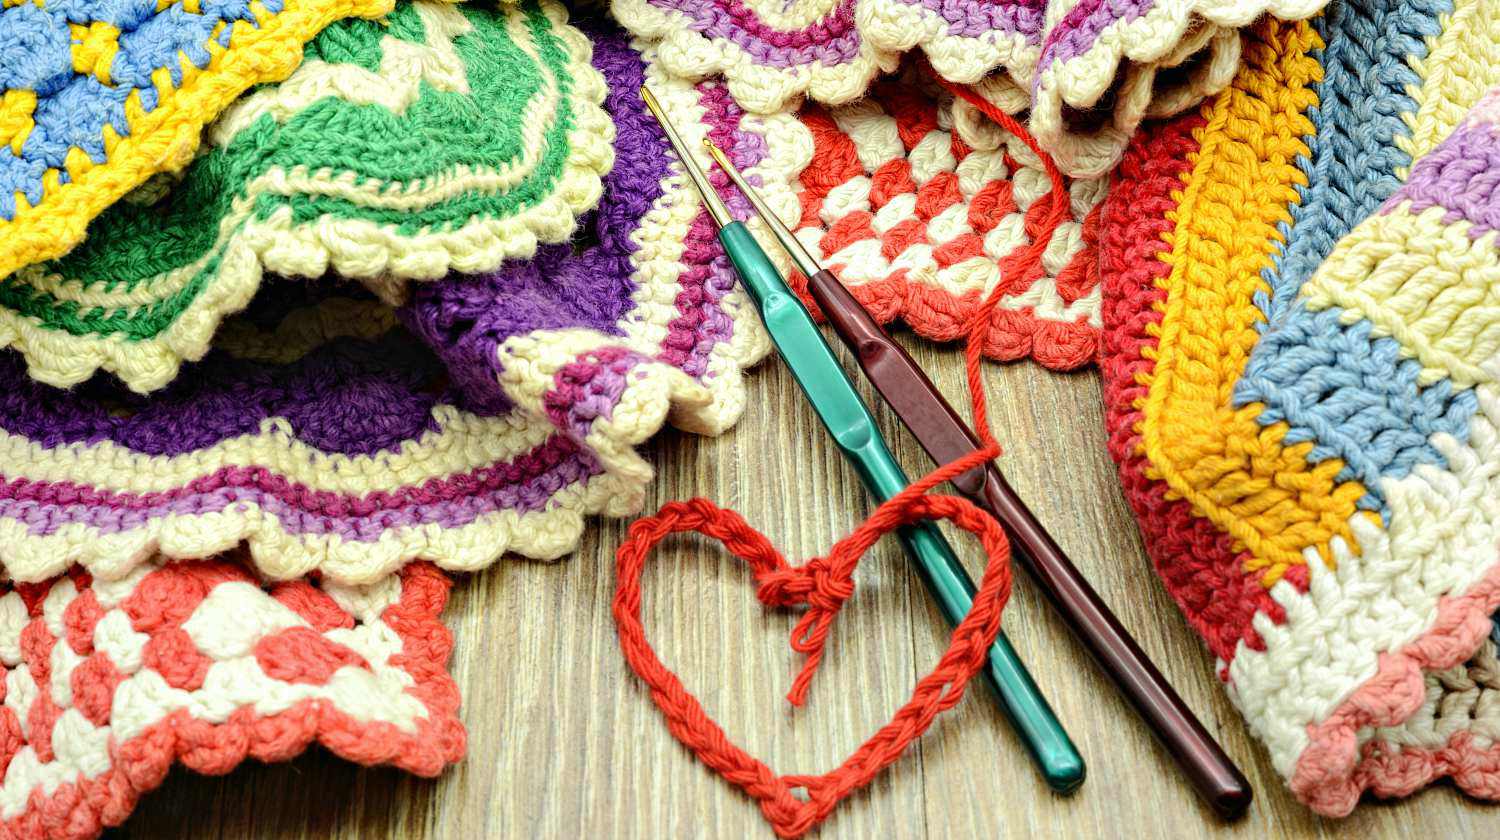 Crocheting colorful oven cloth | How To Crochet Stitches | Crocheting For Beginners | Featured